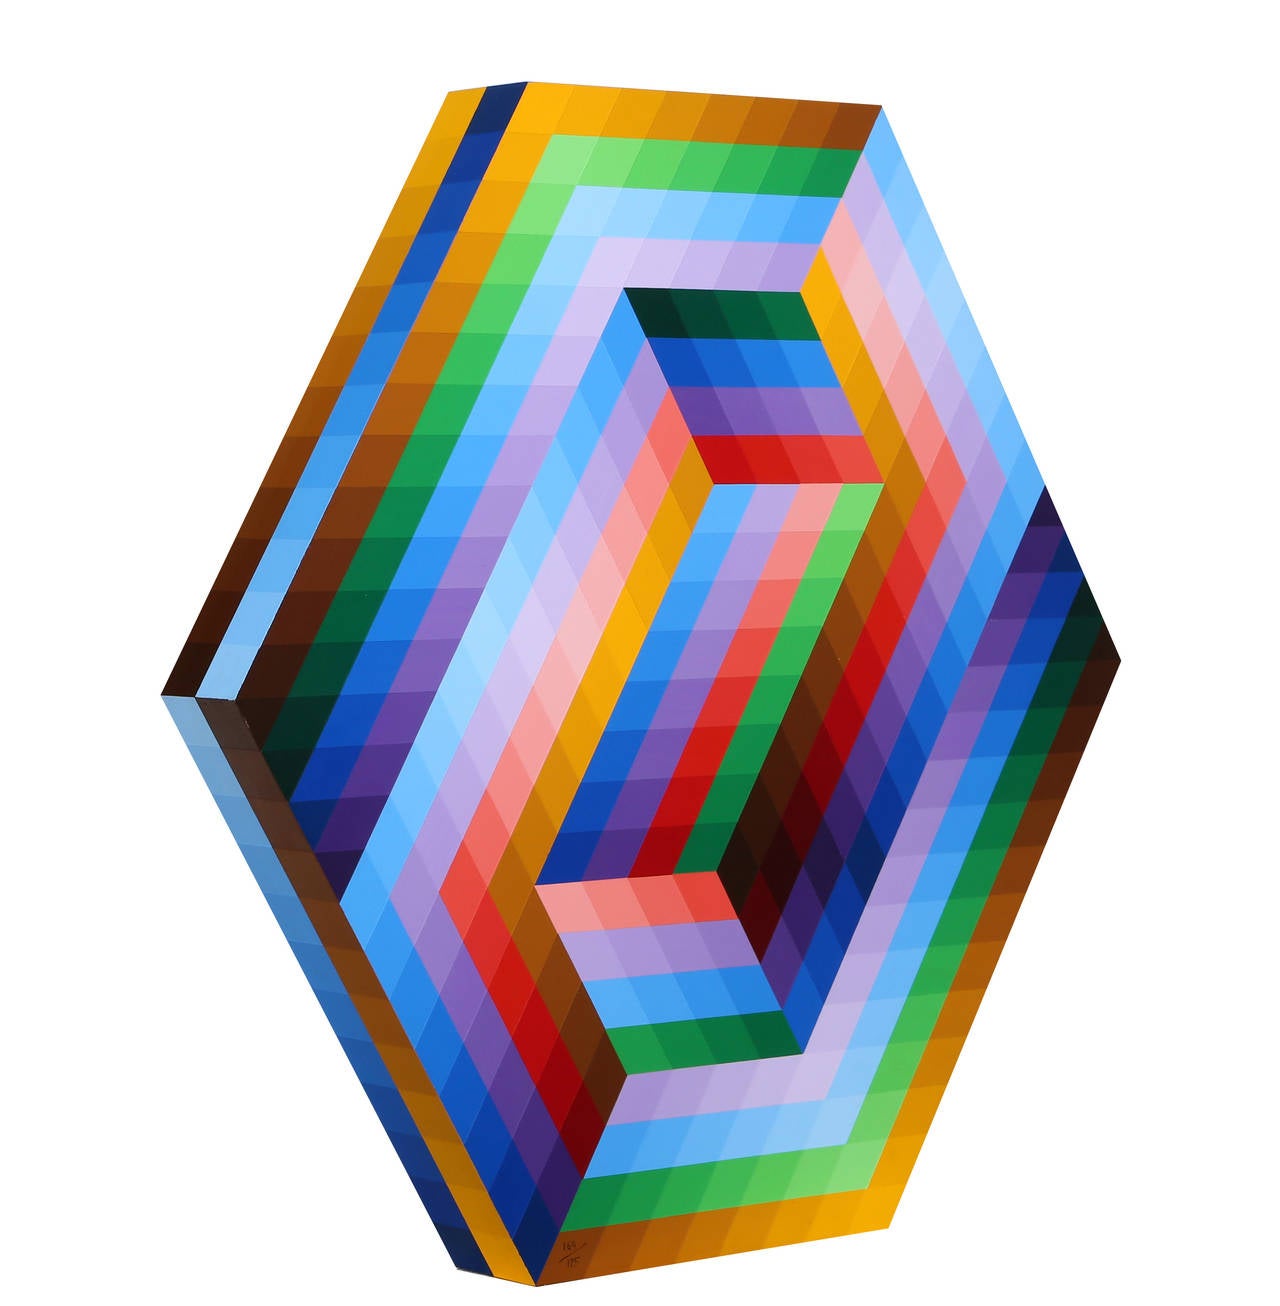 This painted wood sculpture by Victor Vasarely is a fine example of Op Art.  Vasarely's use of contrasting colors and shades heighten the visual experience.

Artist:	Victor Vasarely
Title: Kezdi	
Year: 1989 - 1990 
Medium:	Painted Wood